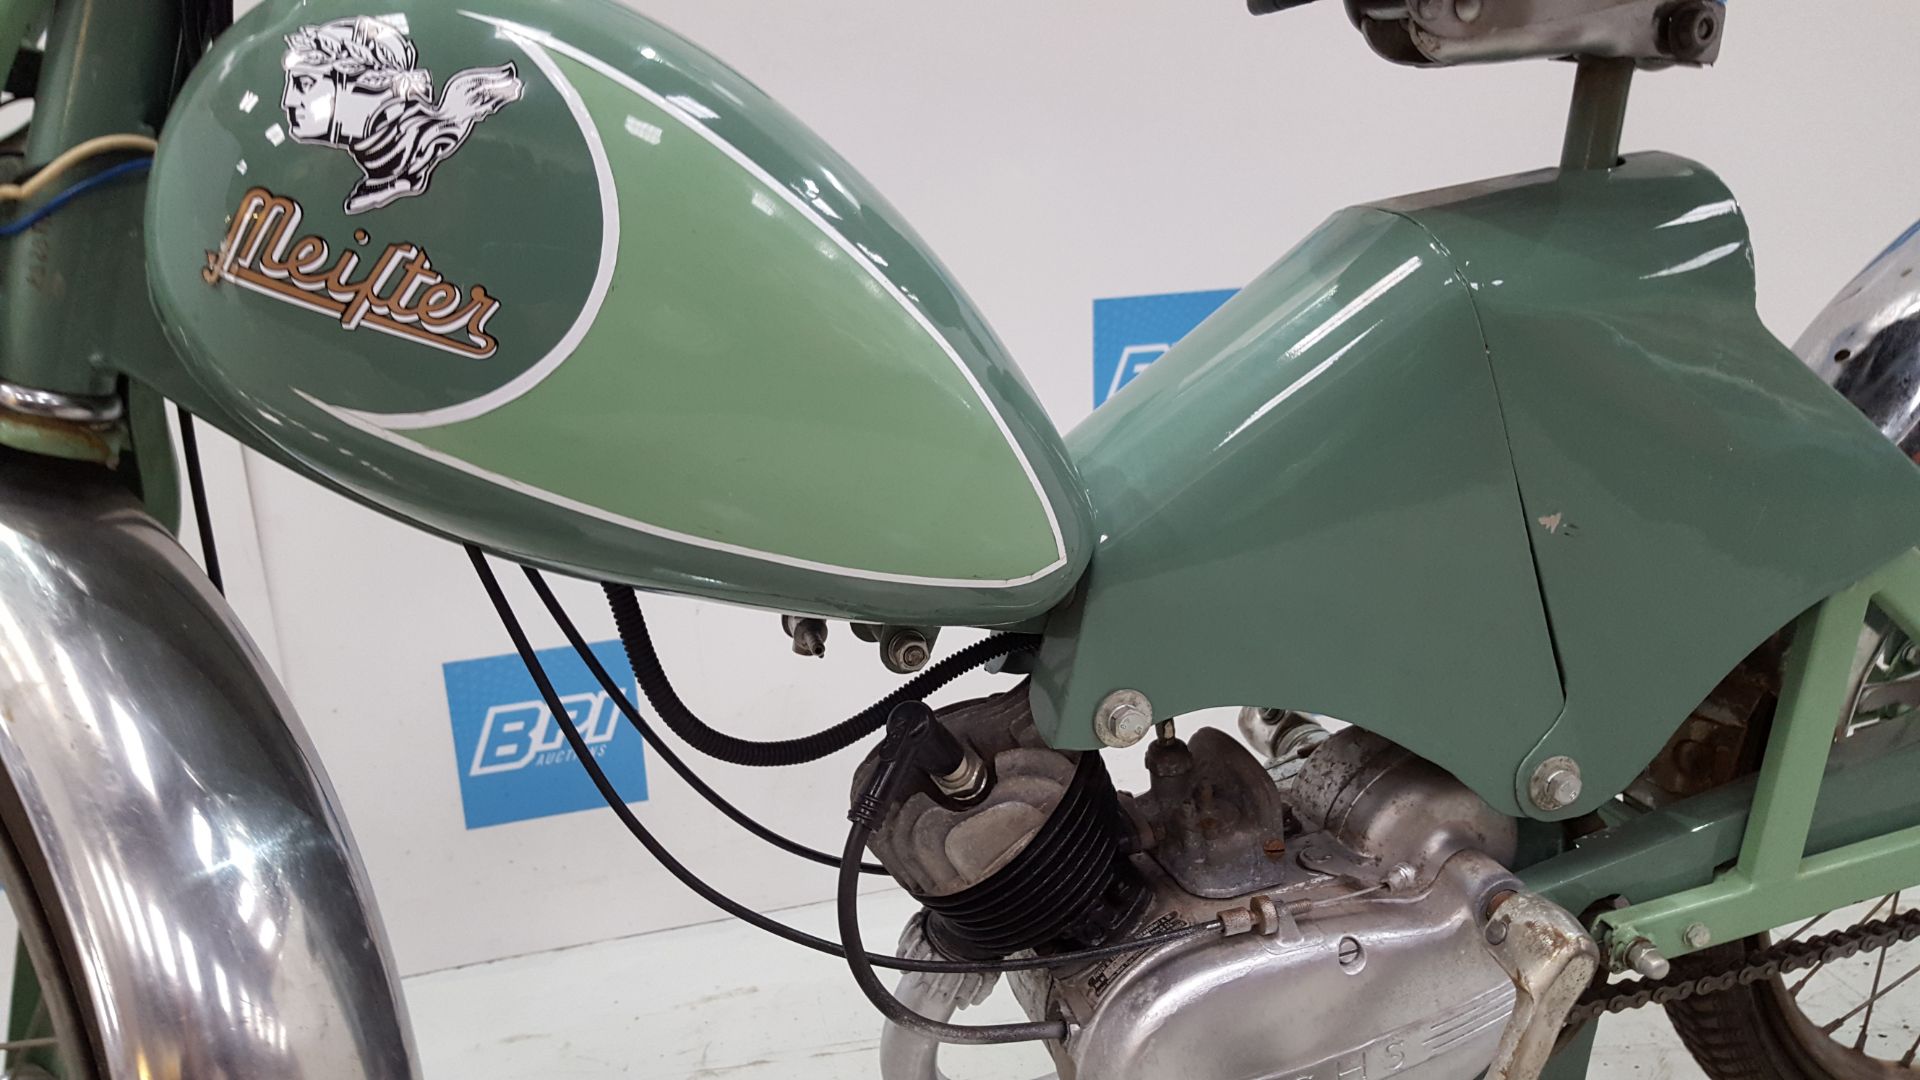 1955 Meister Moped 50cc - Image 7 of 10